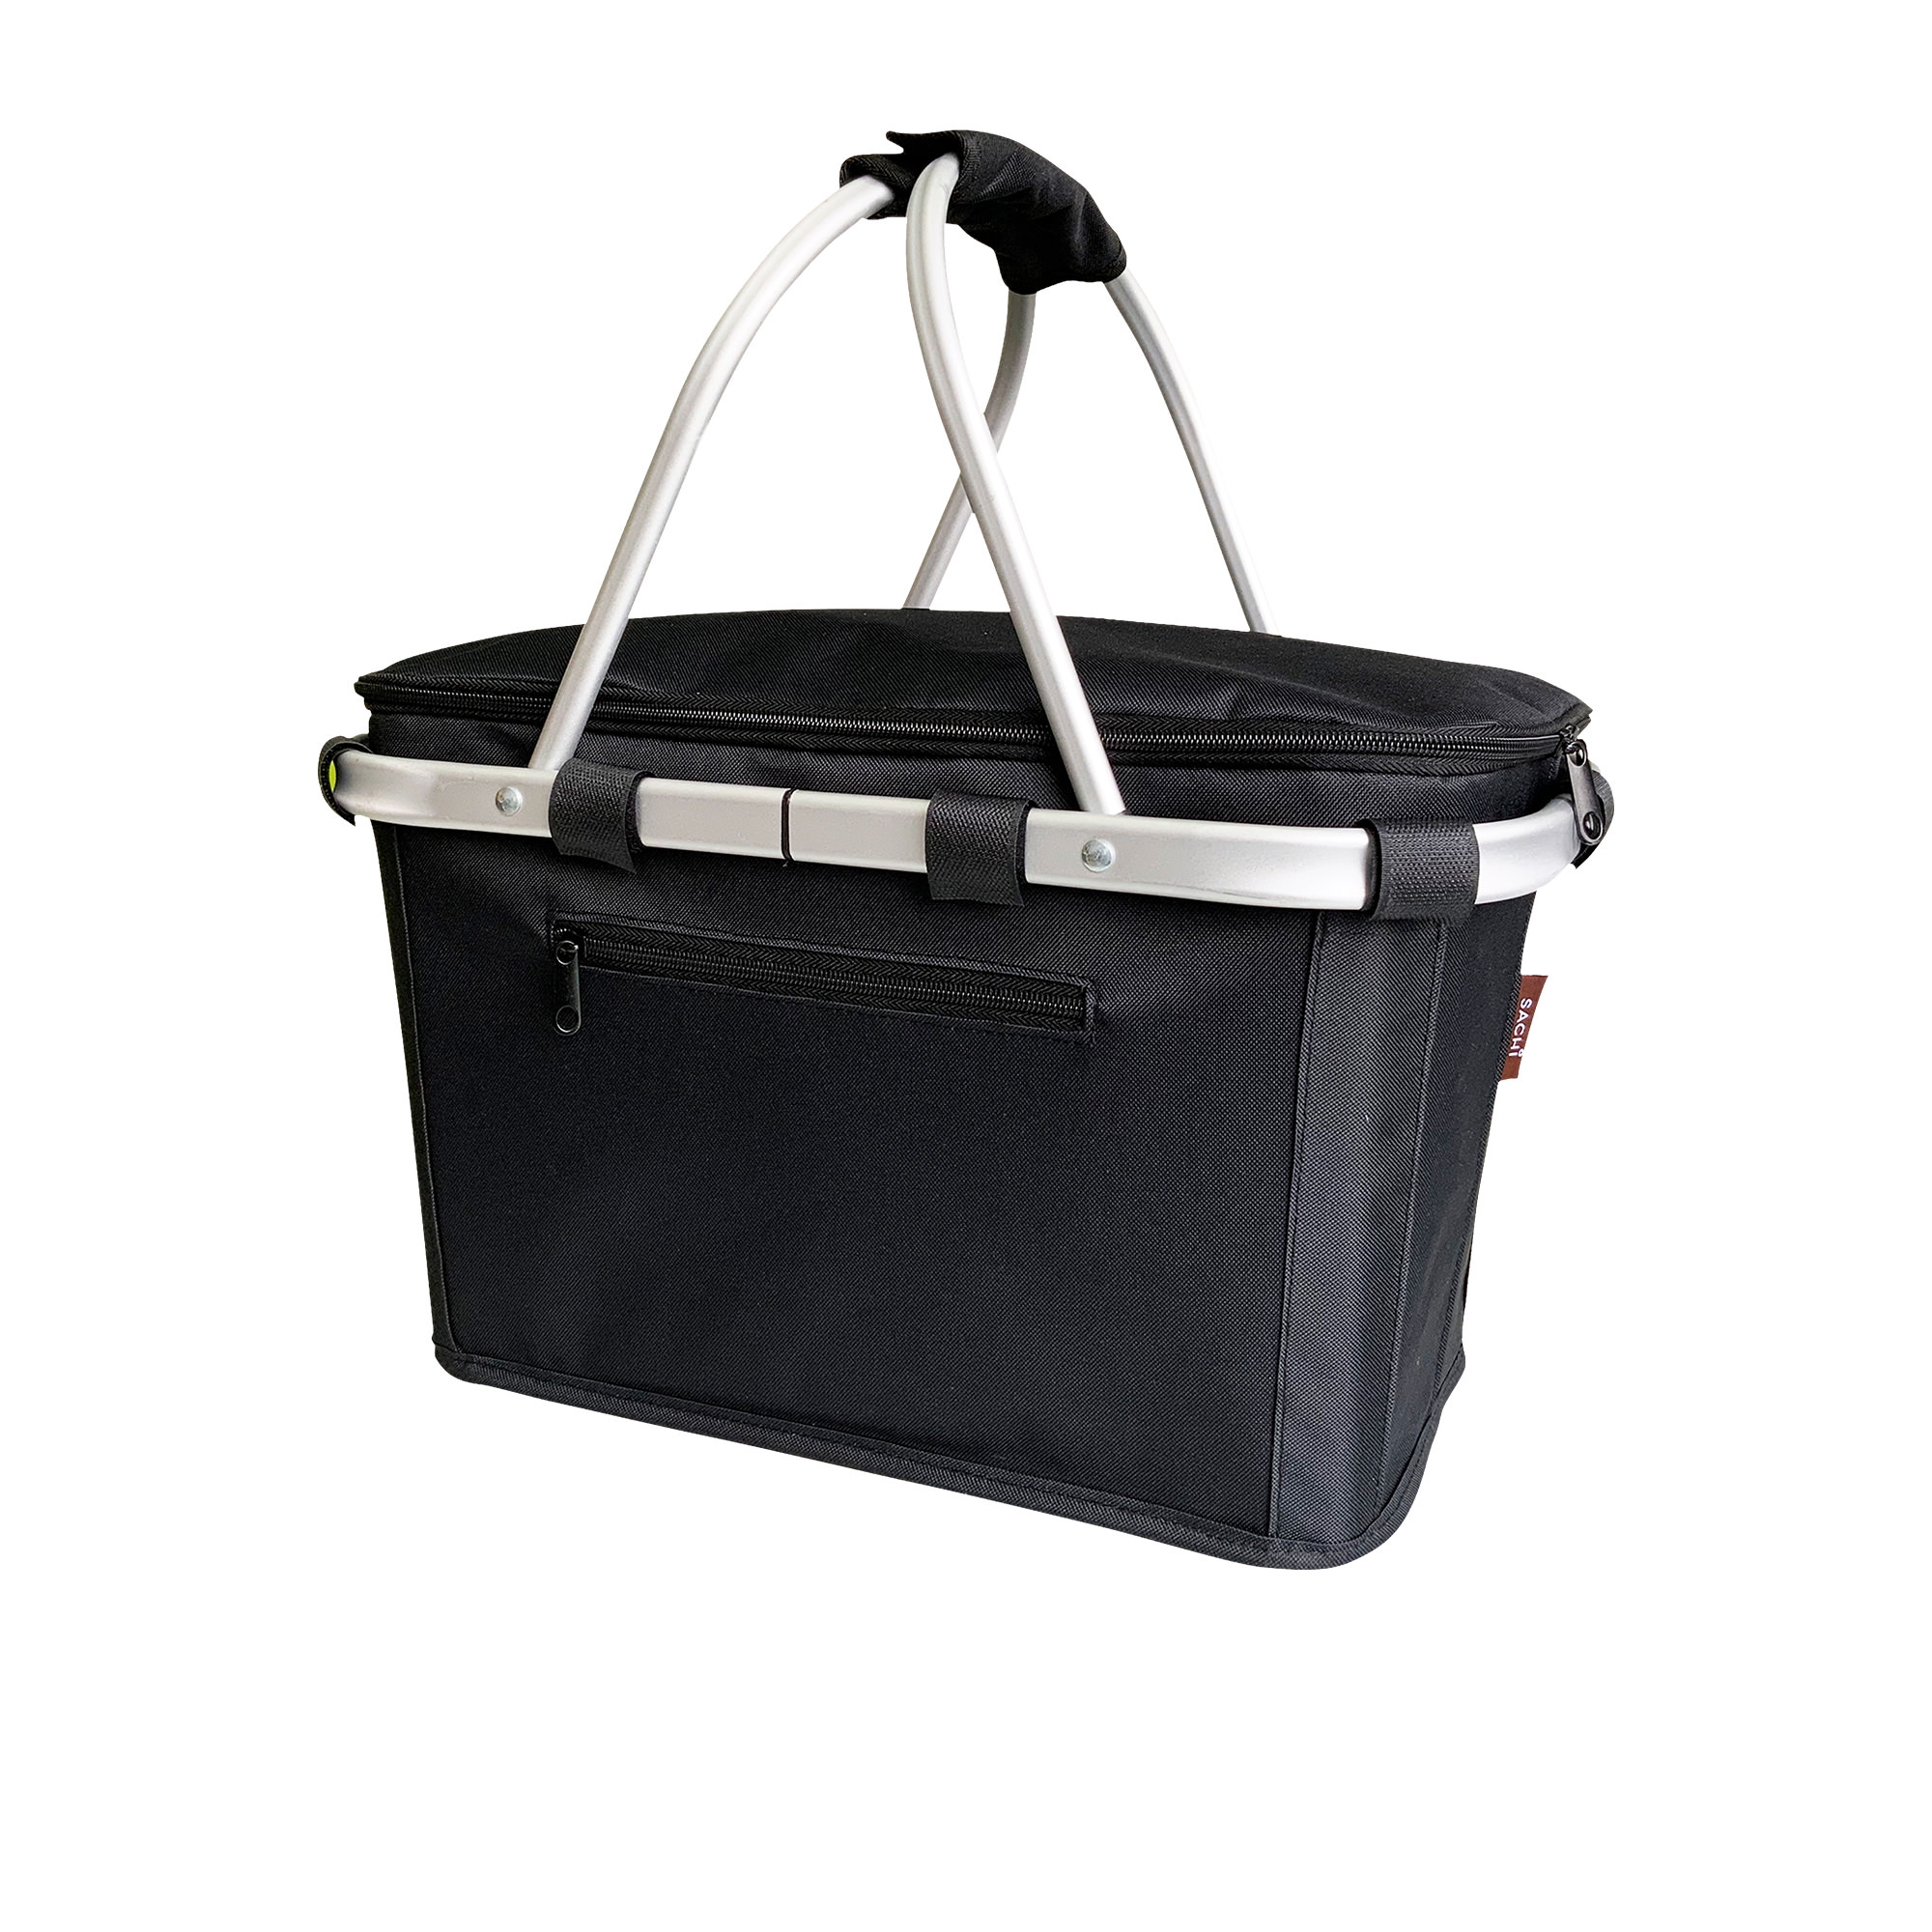 Sachi Insulated Carry Basket with Lid Black Image 1